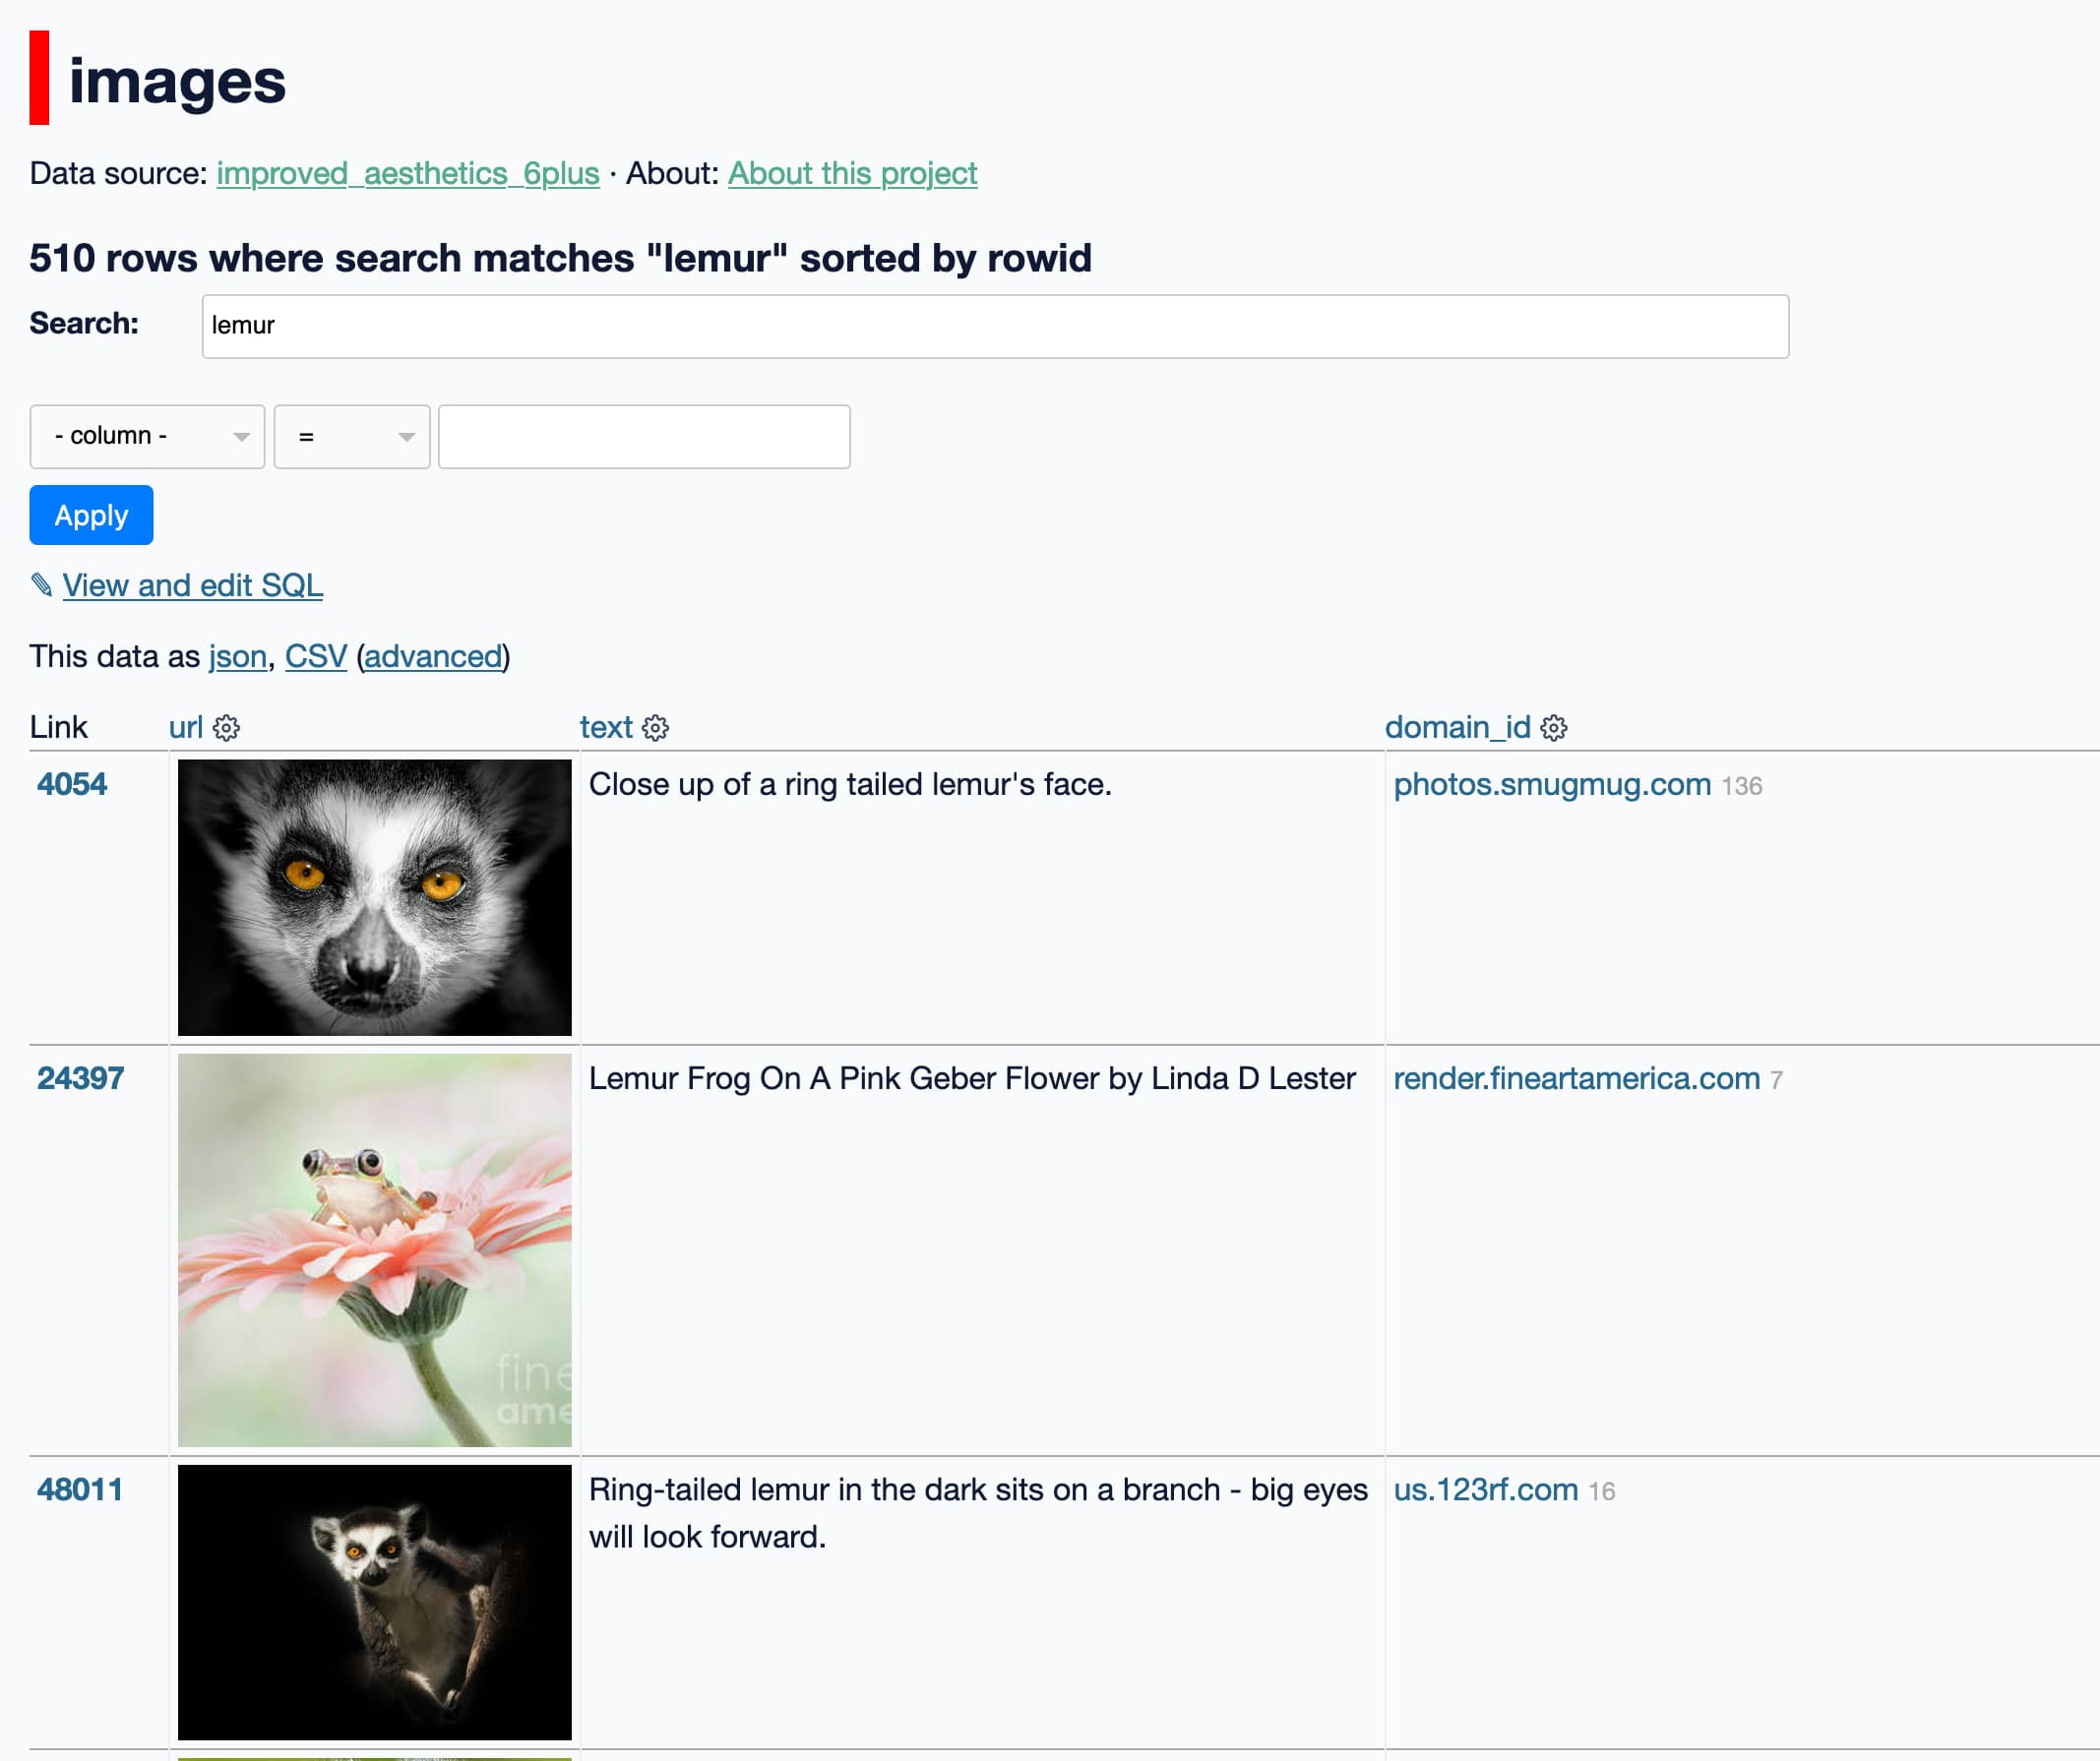 Screenshot of the search interface, showing the results for lemur